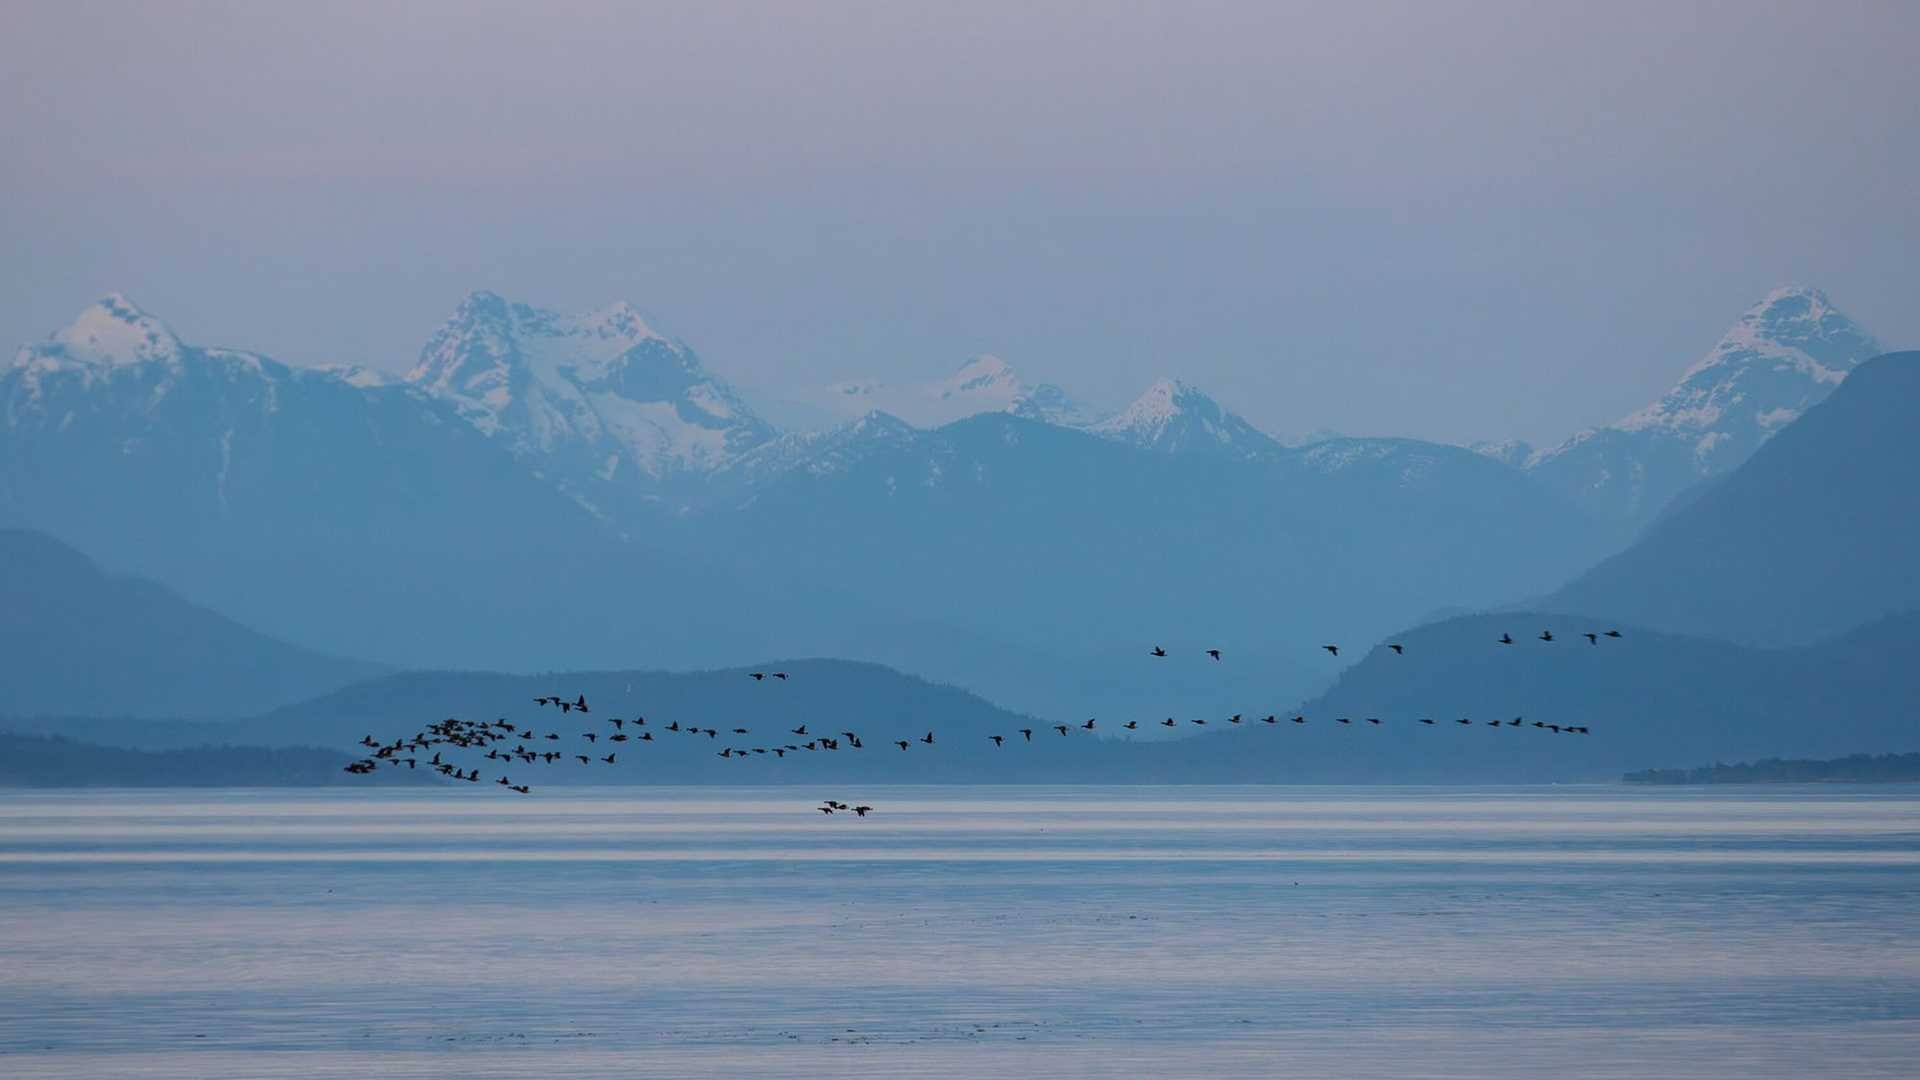 A large group of Brant Geese fly north over blue and light purple still waters in the distance with snow-capped mountains in the background partially obscured by a light haze.